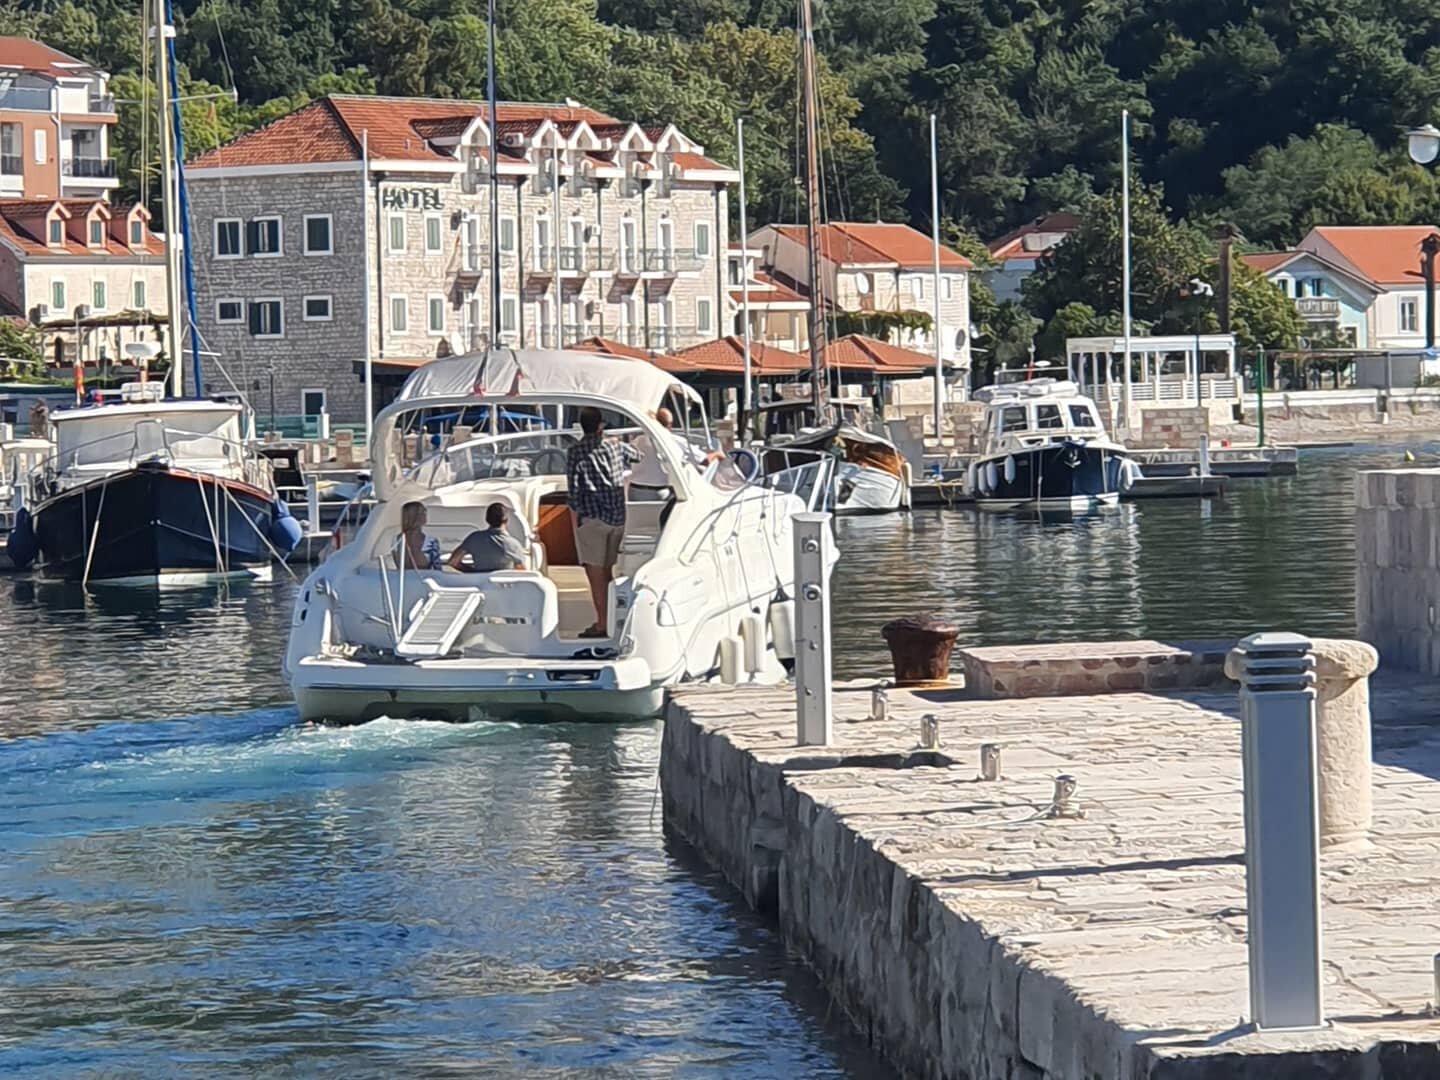 Montenegro is s surprising us with wonderful weather, charter ready and views on views. October charter, beautiful scenery, yacht, family. Perfect.
Looking forward to welcoming all our returning and new clients on-board our yachts.
#charter #yachting